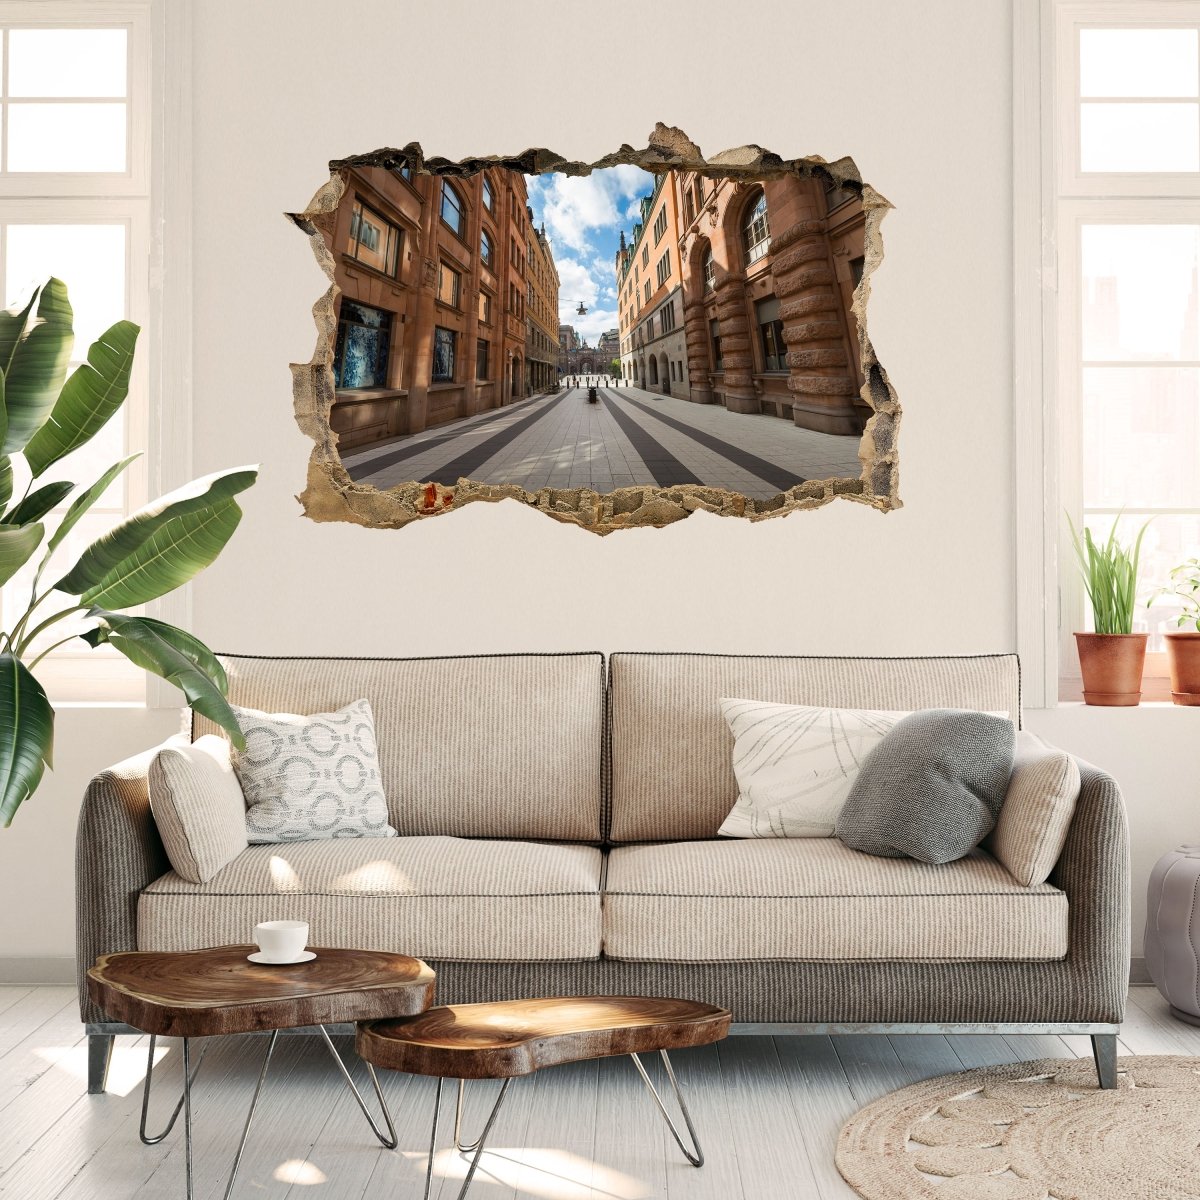 3D wall sticker Old Town, Stockholm - Wall Decal M0820